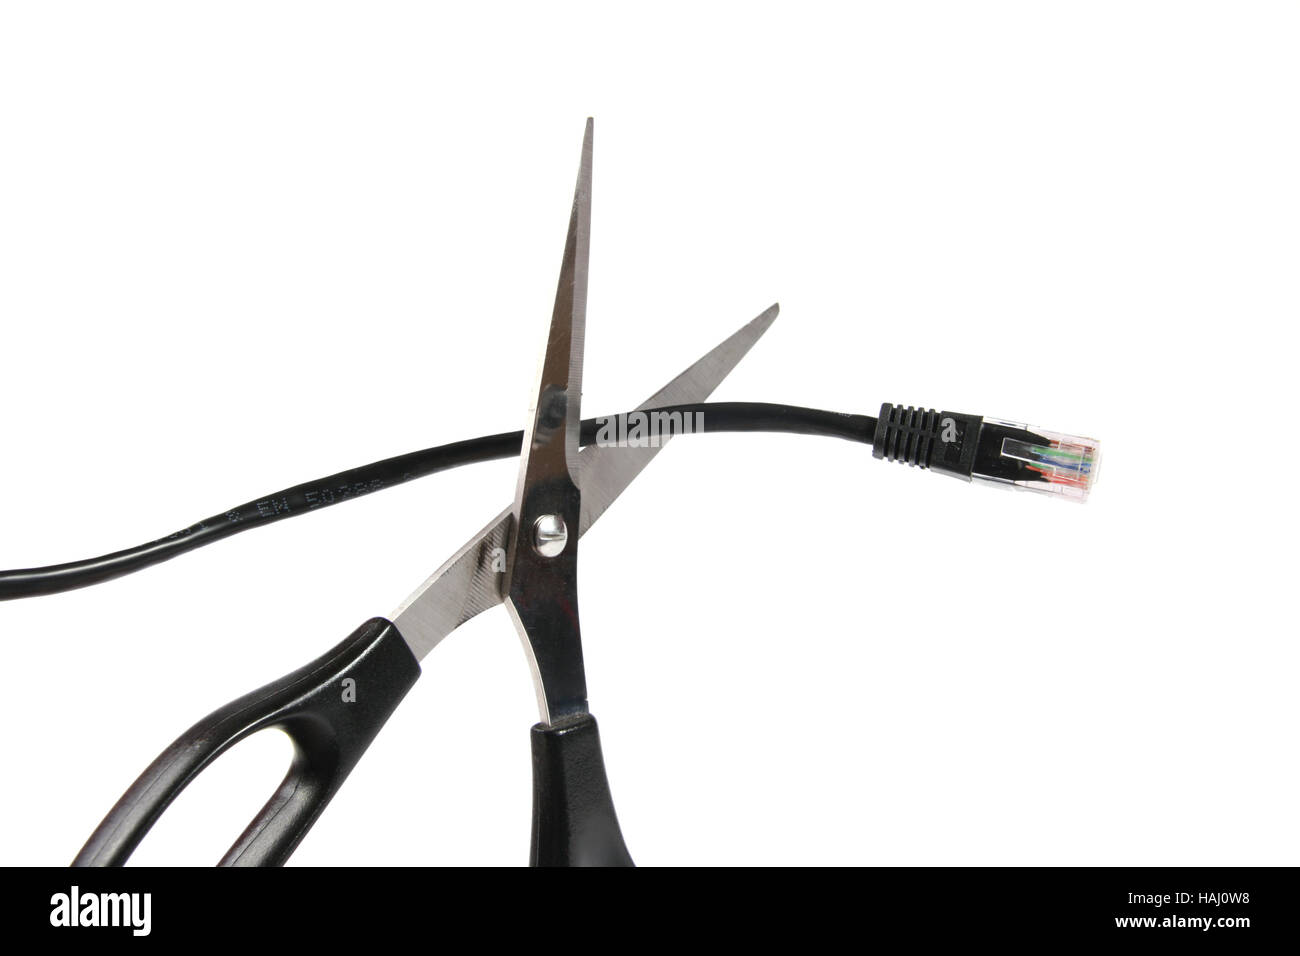 Scissors cutting a network cable Stock Photo